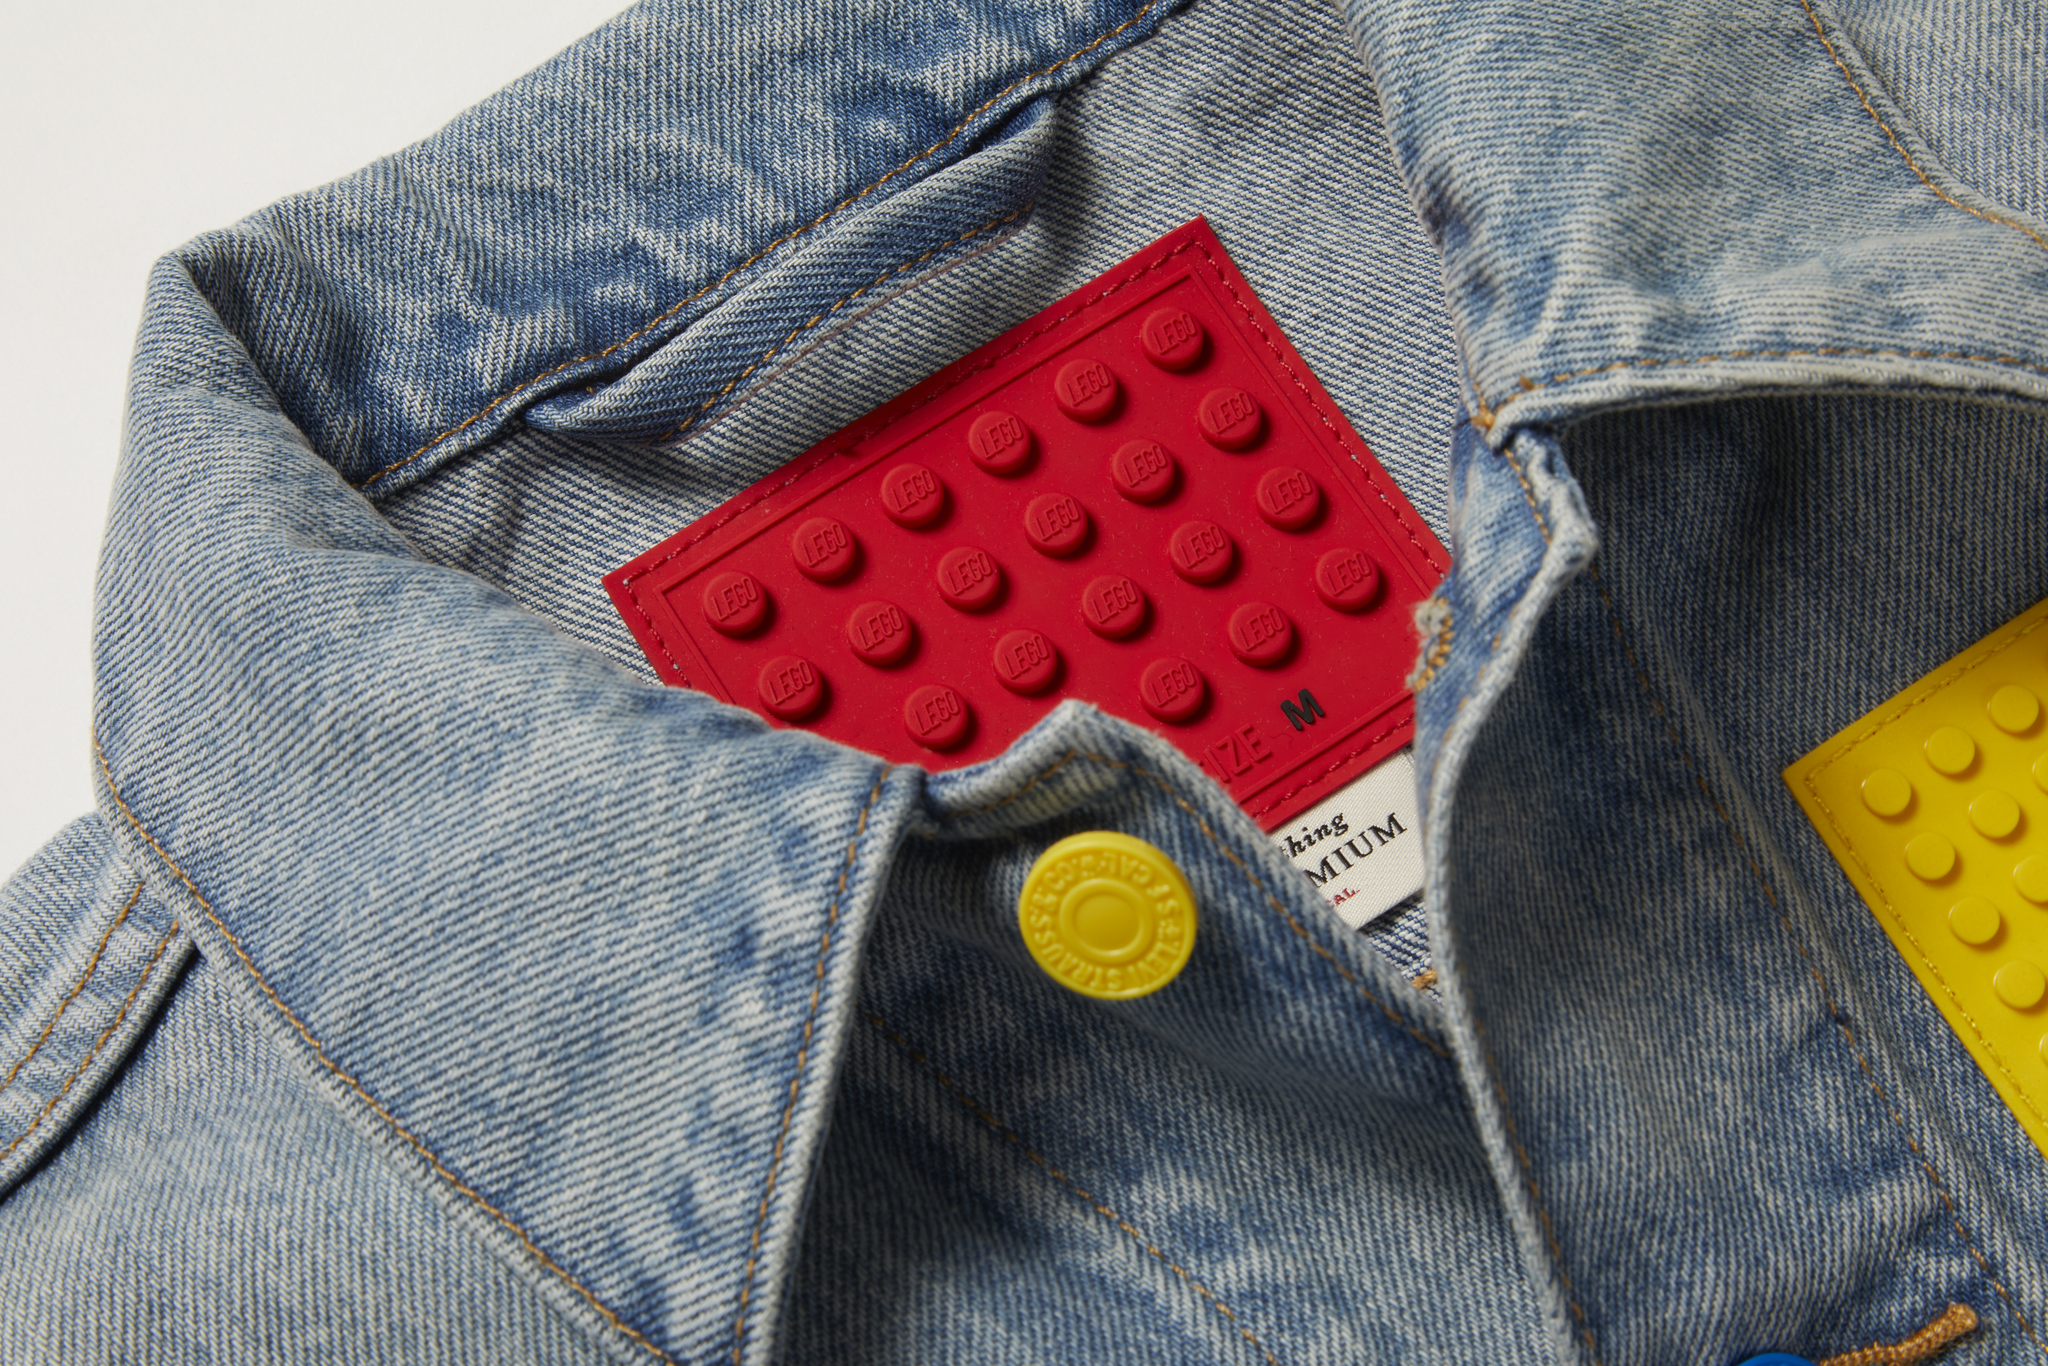 Lego x Levi's Limited-Edition Collection Coming October 1 | POPSUGAR Fashion